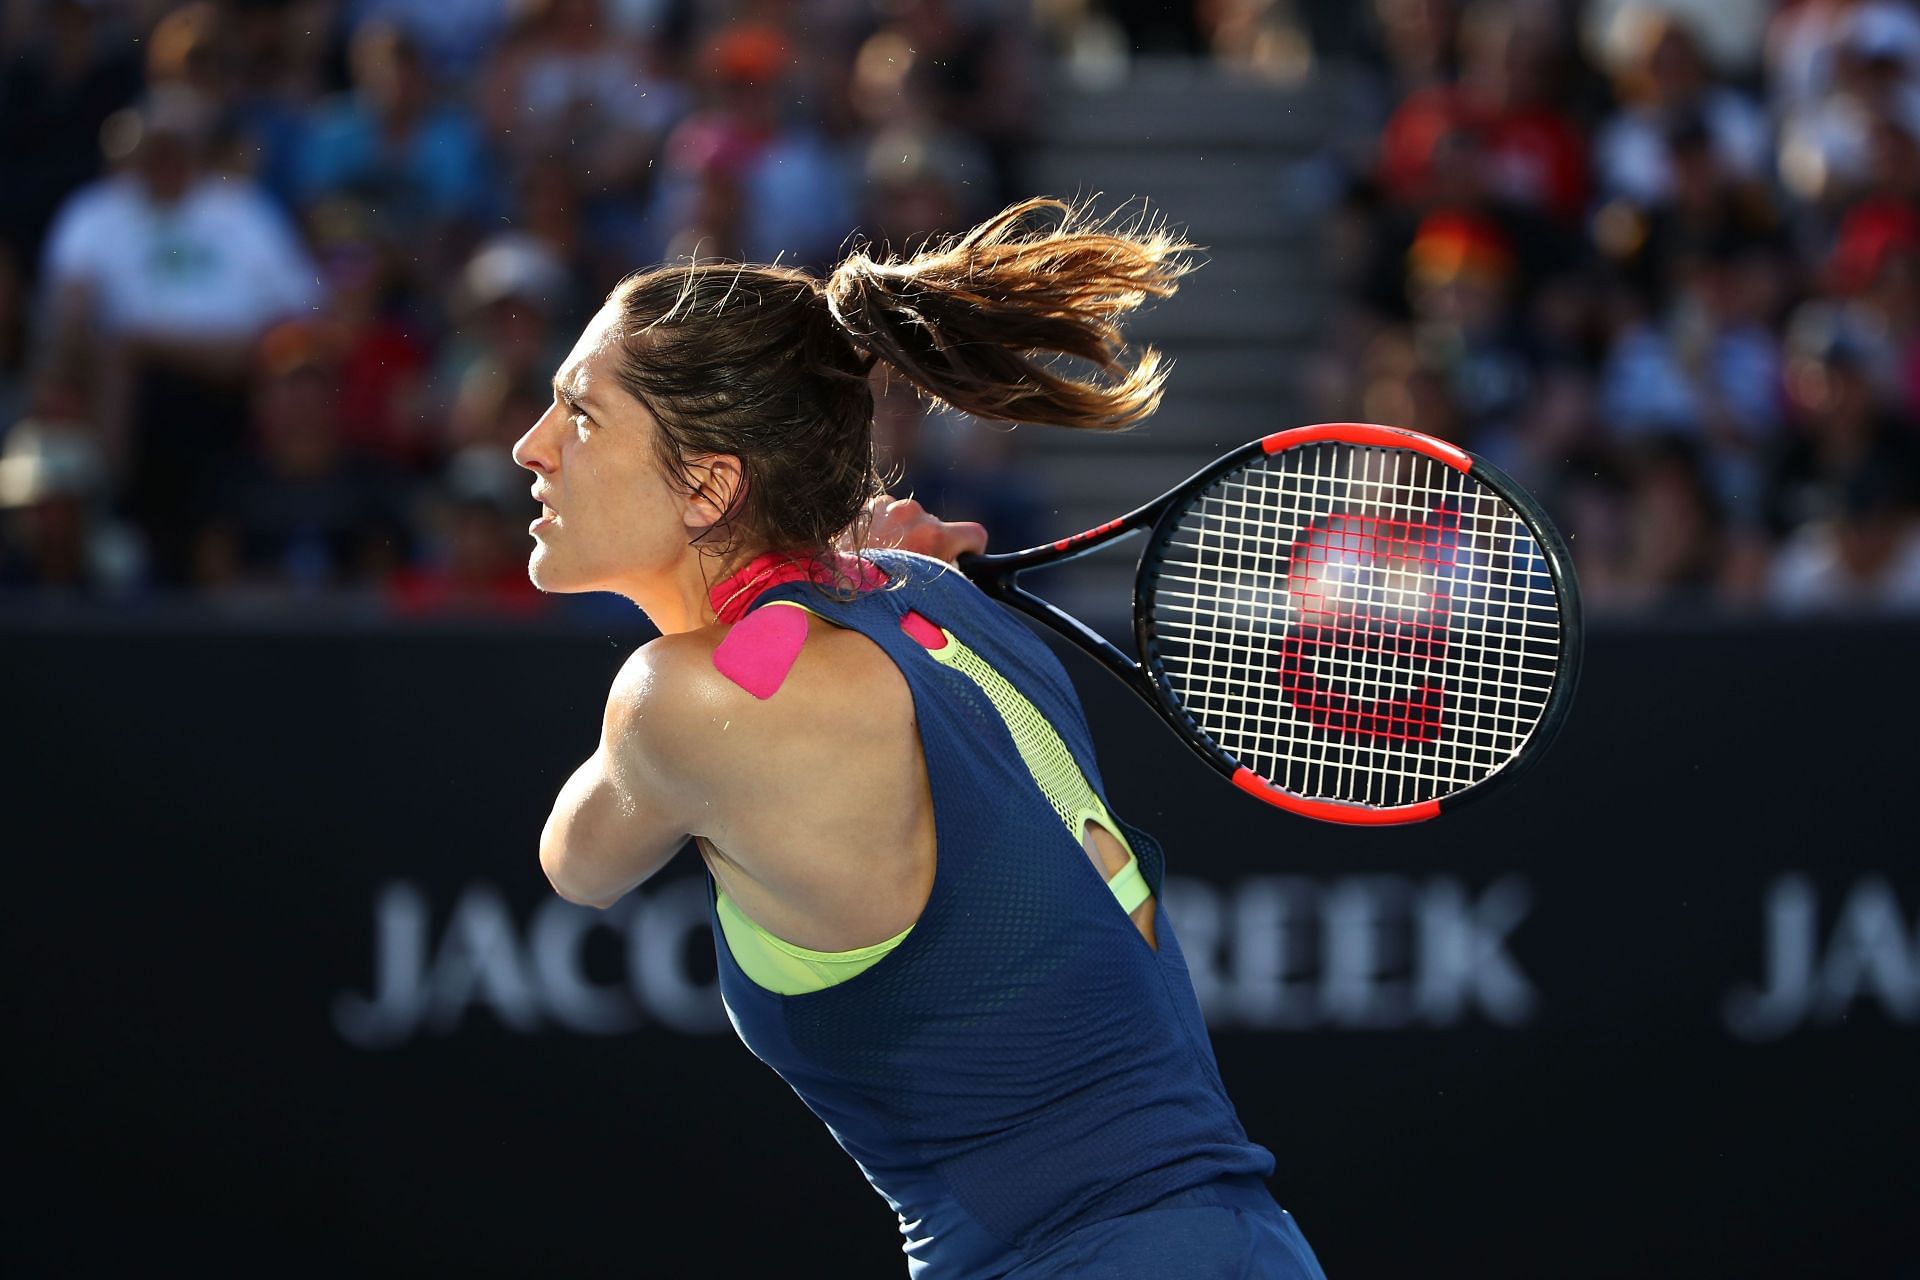 Petkovic will be looking to rediscover her form.